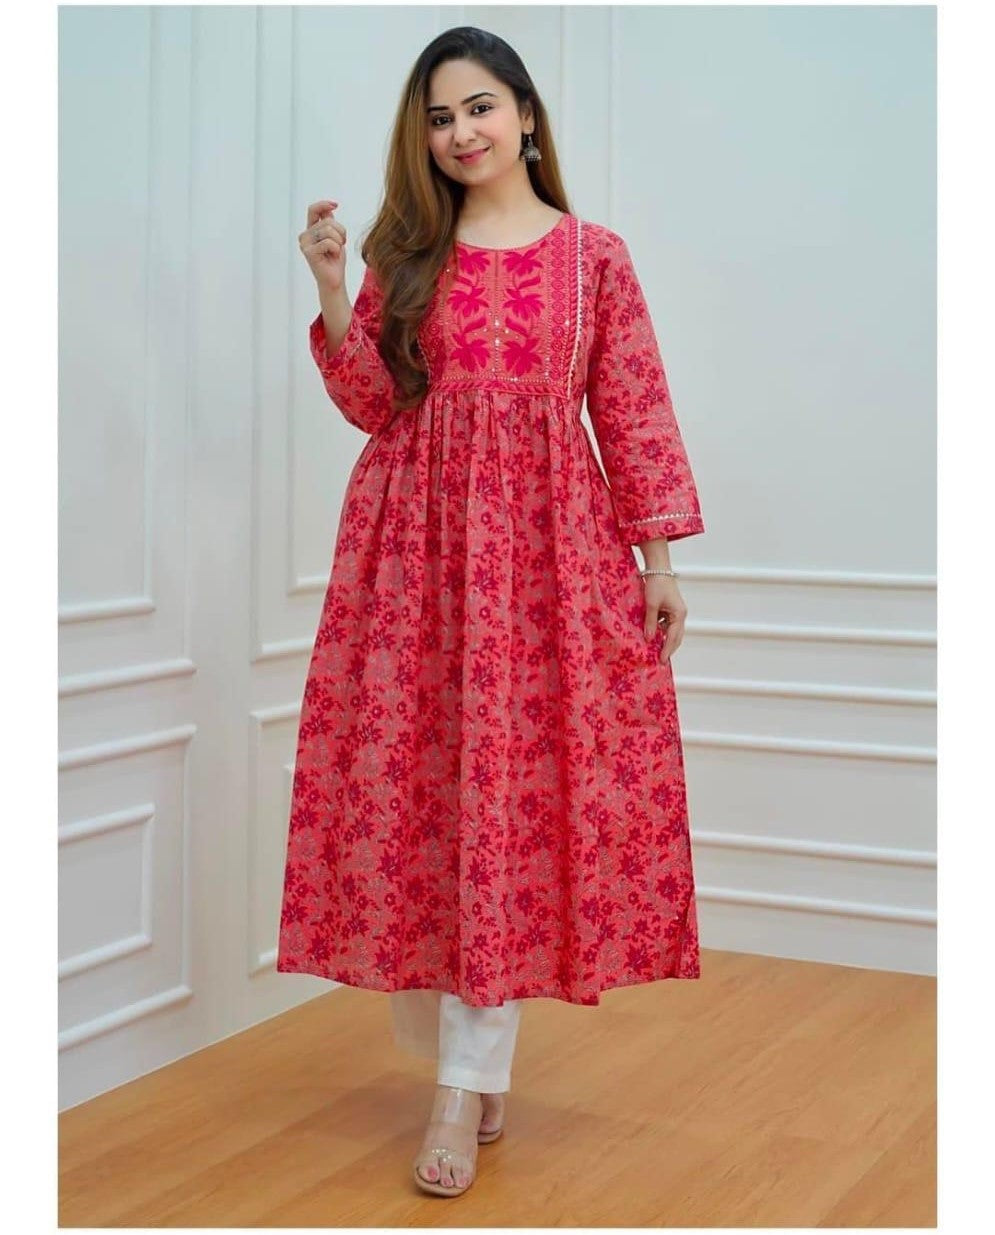 Elegant Red Cotton Anarkali Kurti Set with Exquisite Embroidery